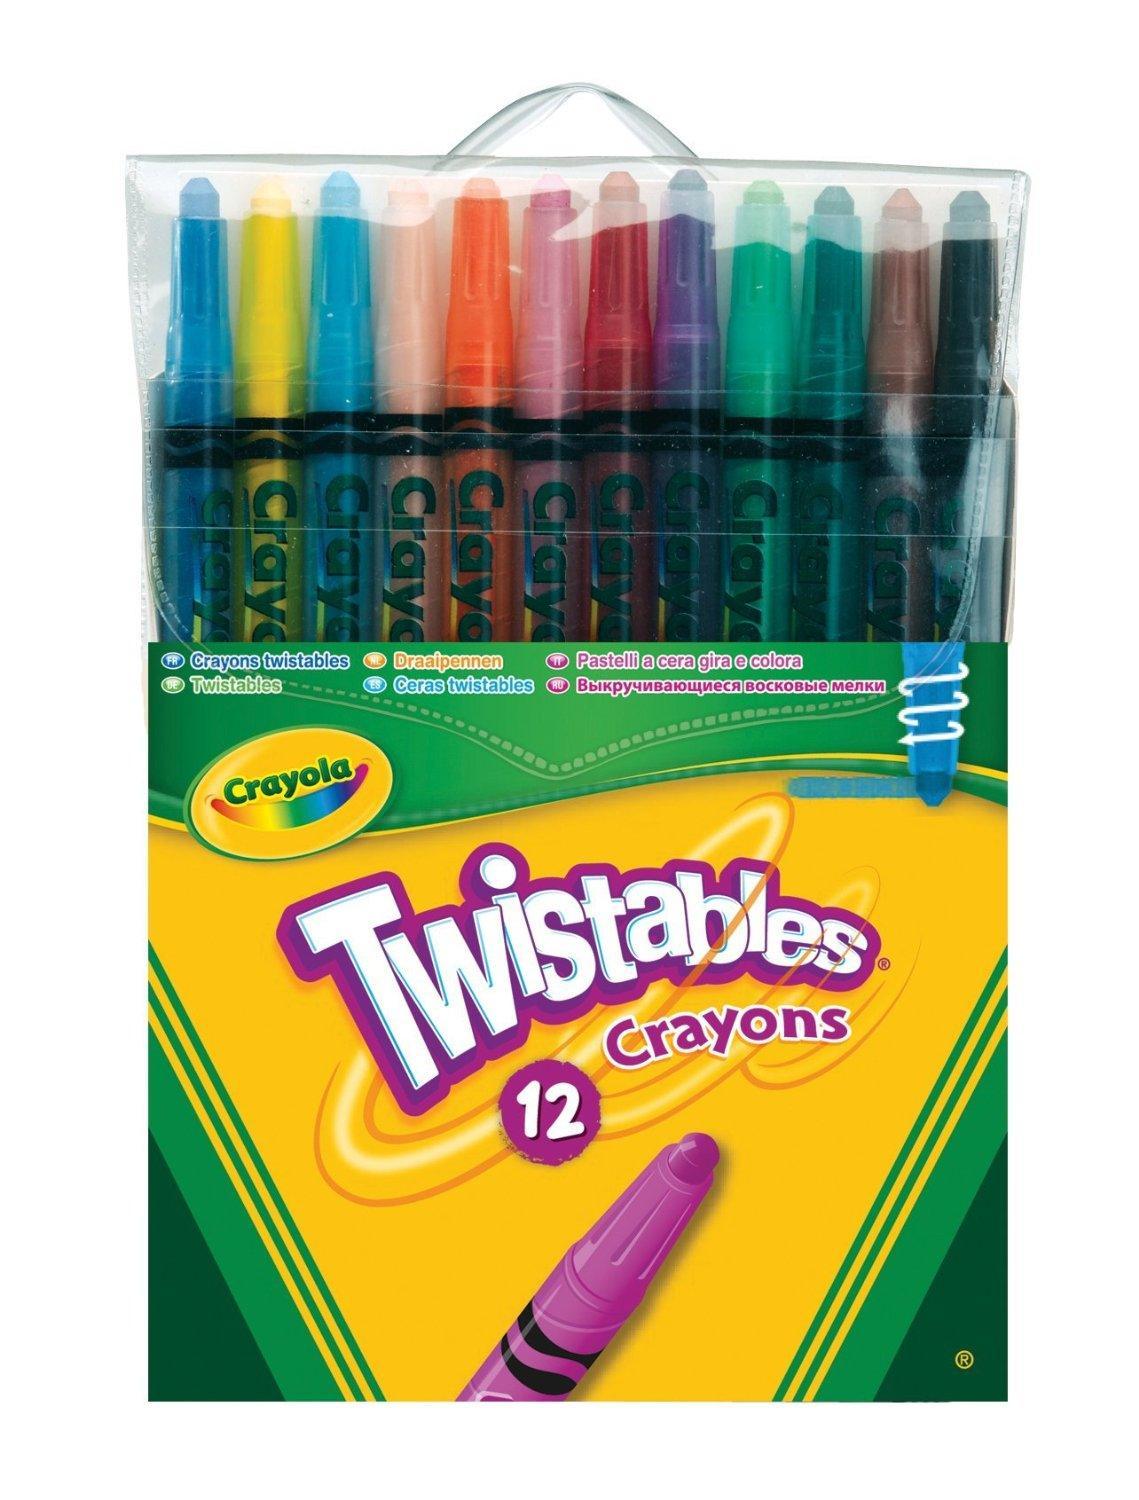 Crayola Twistable Crayons | 12 Pack - Choice Stores